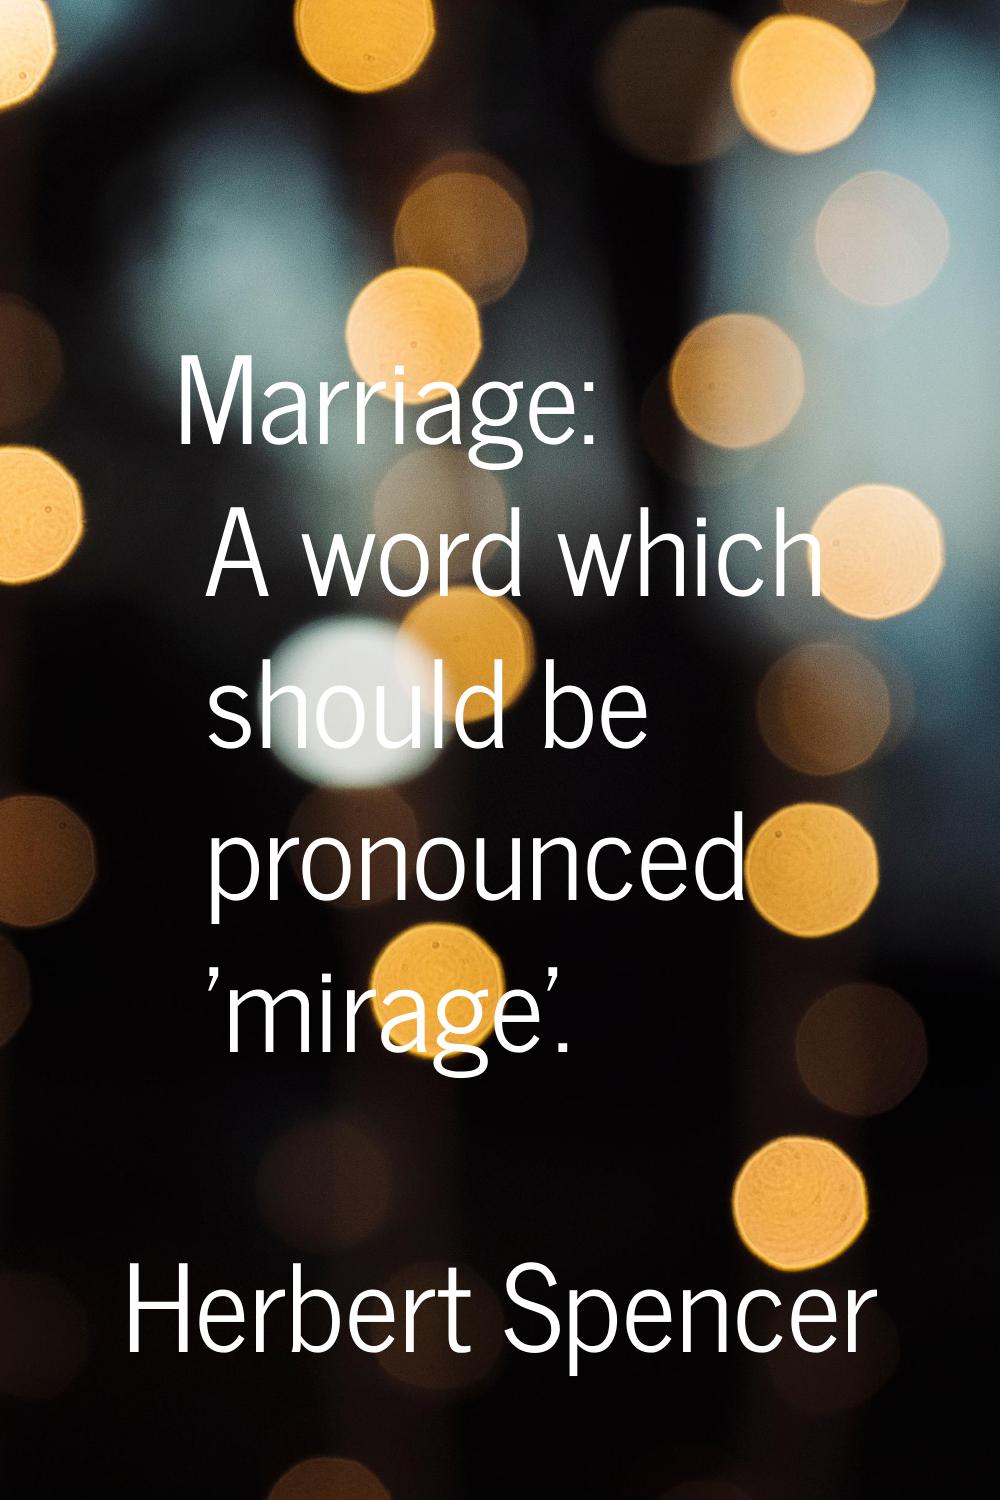 Marriage: A word which should be pronounced 'mirage'.